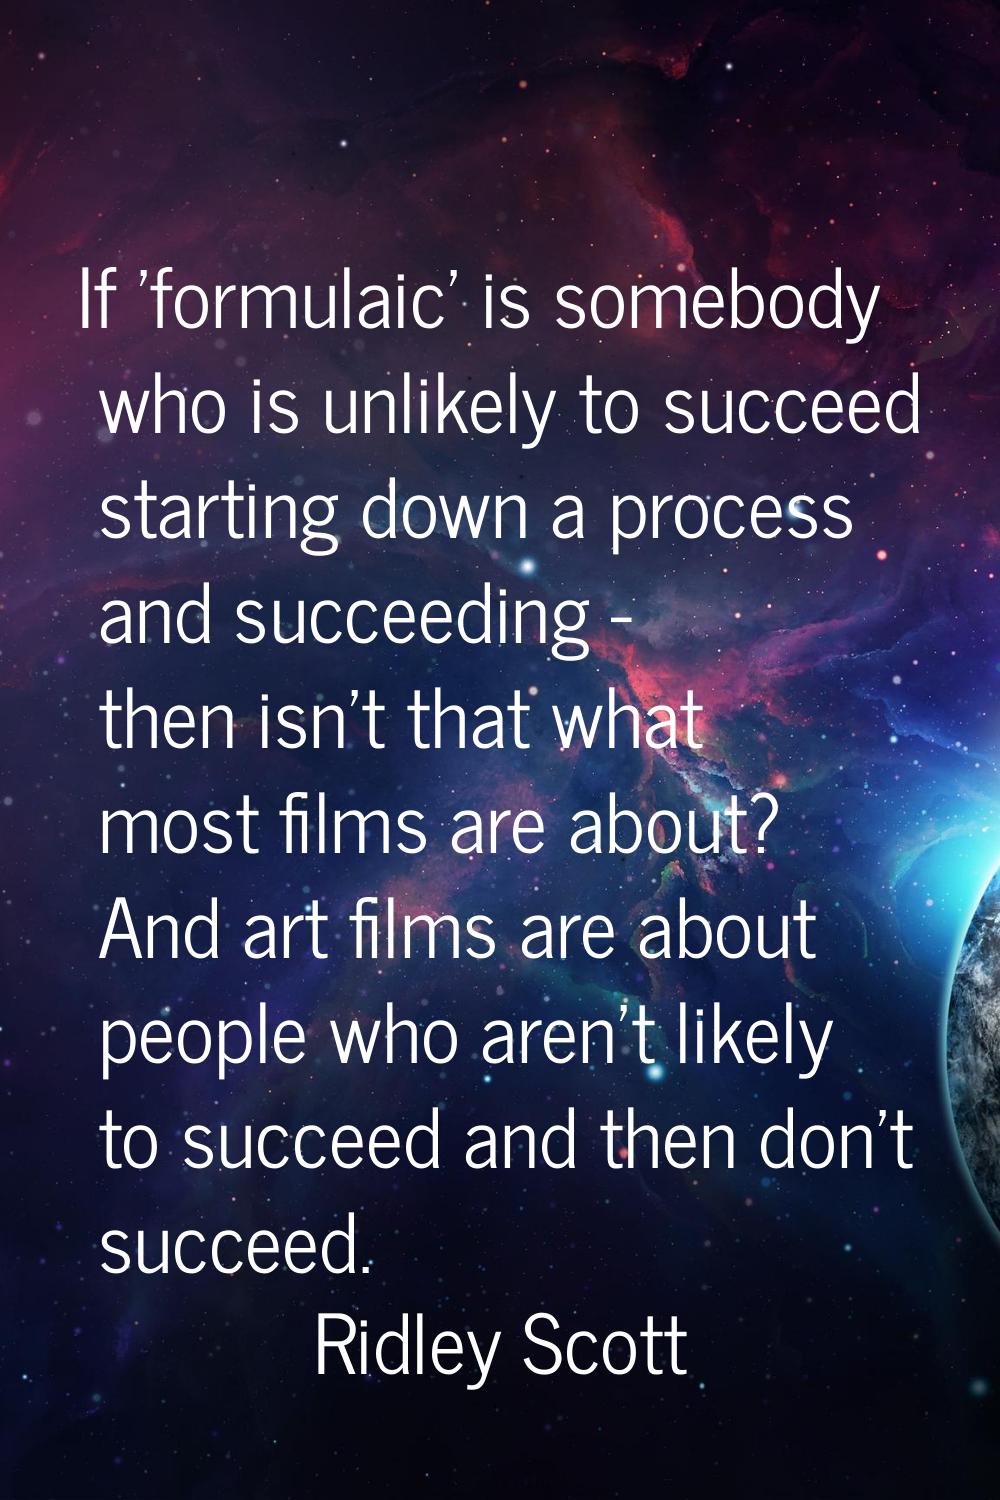 If 'formulaic' is somebody who is unlikely to succeed starting down a process and succeeding - then